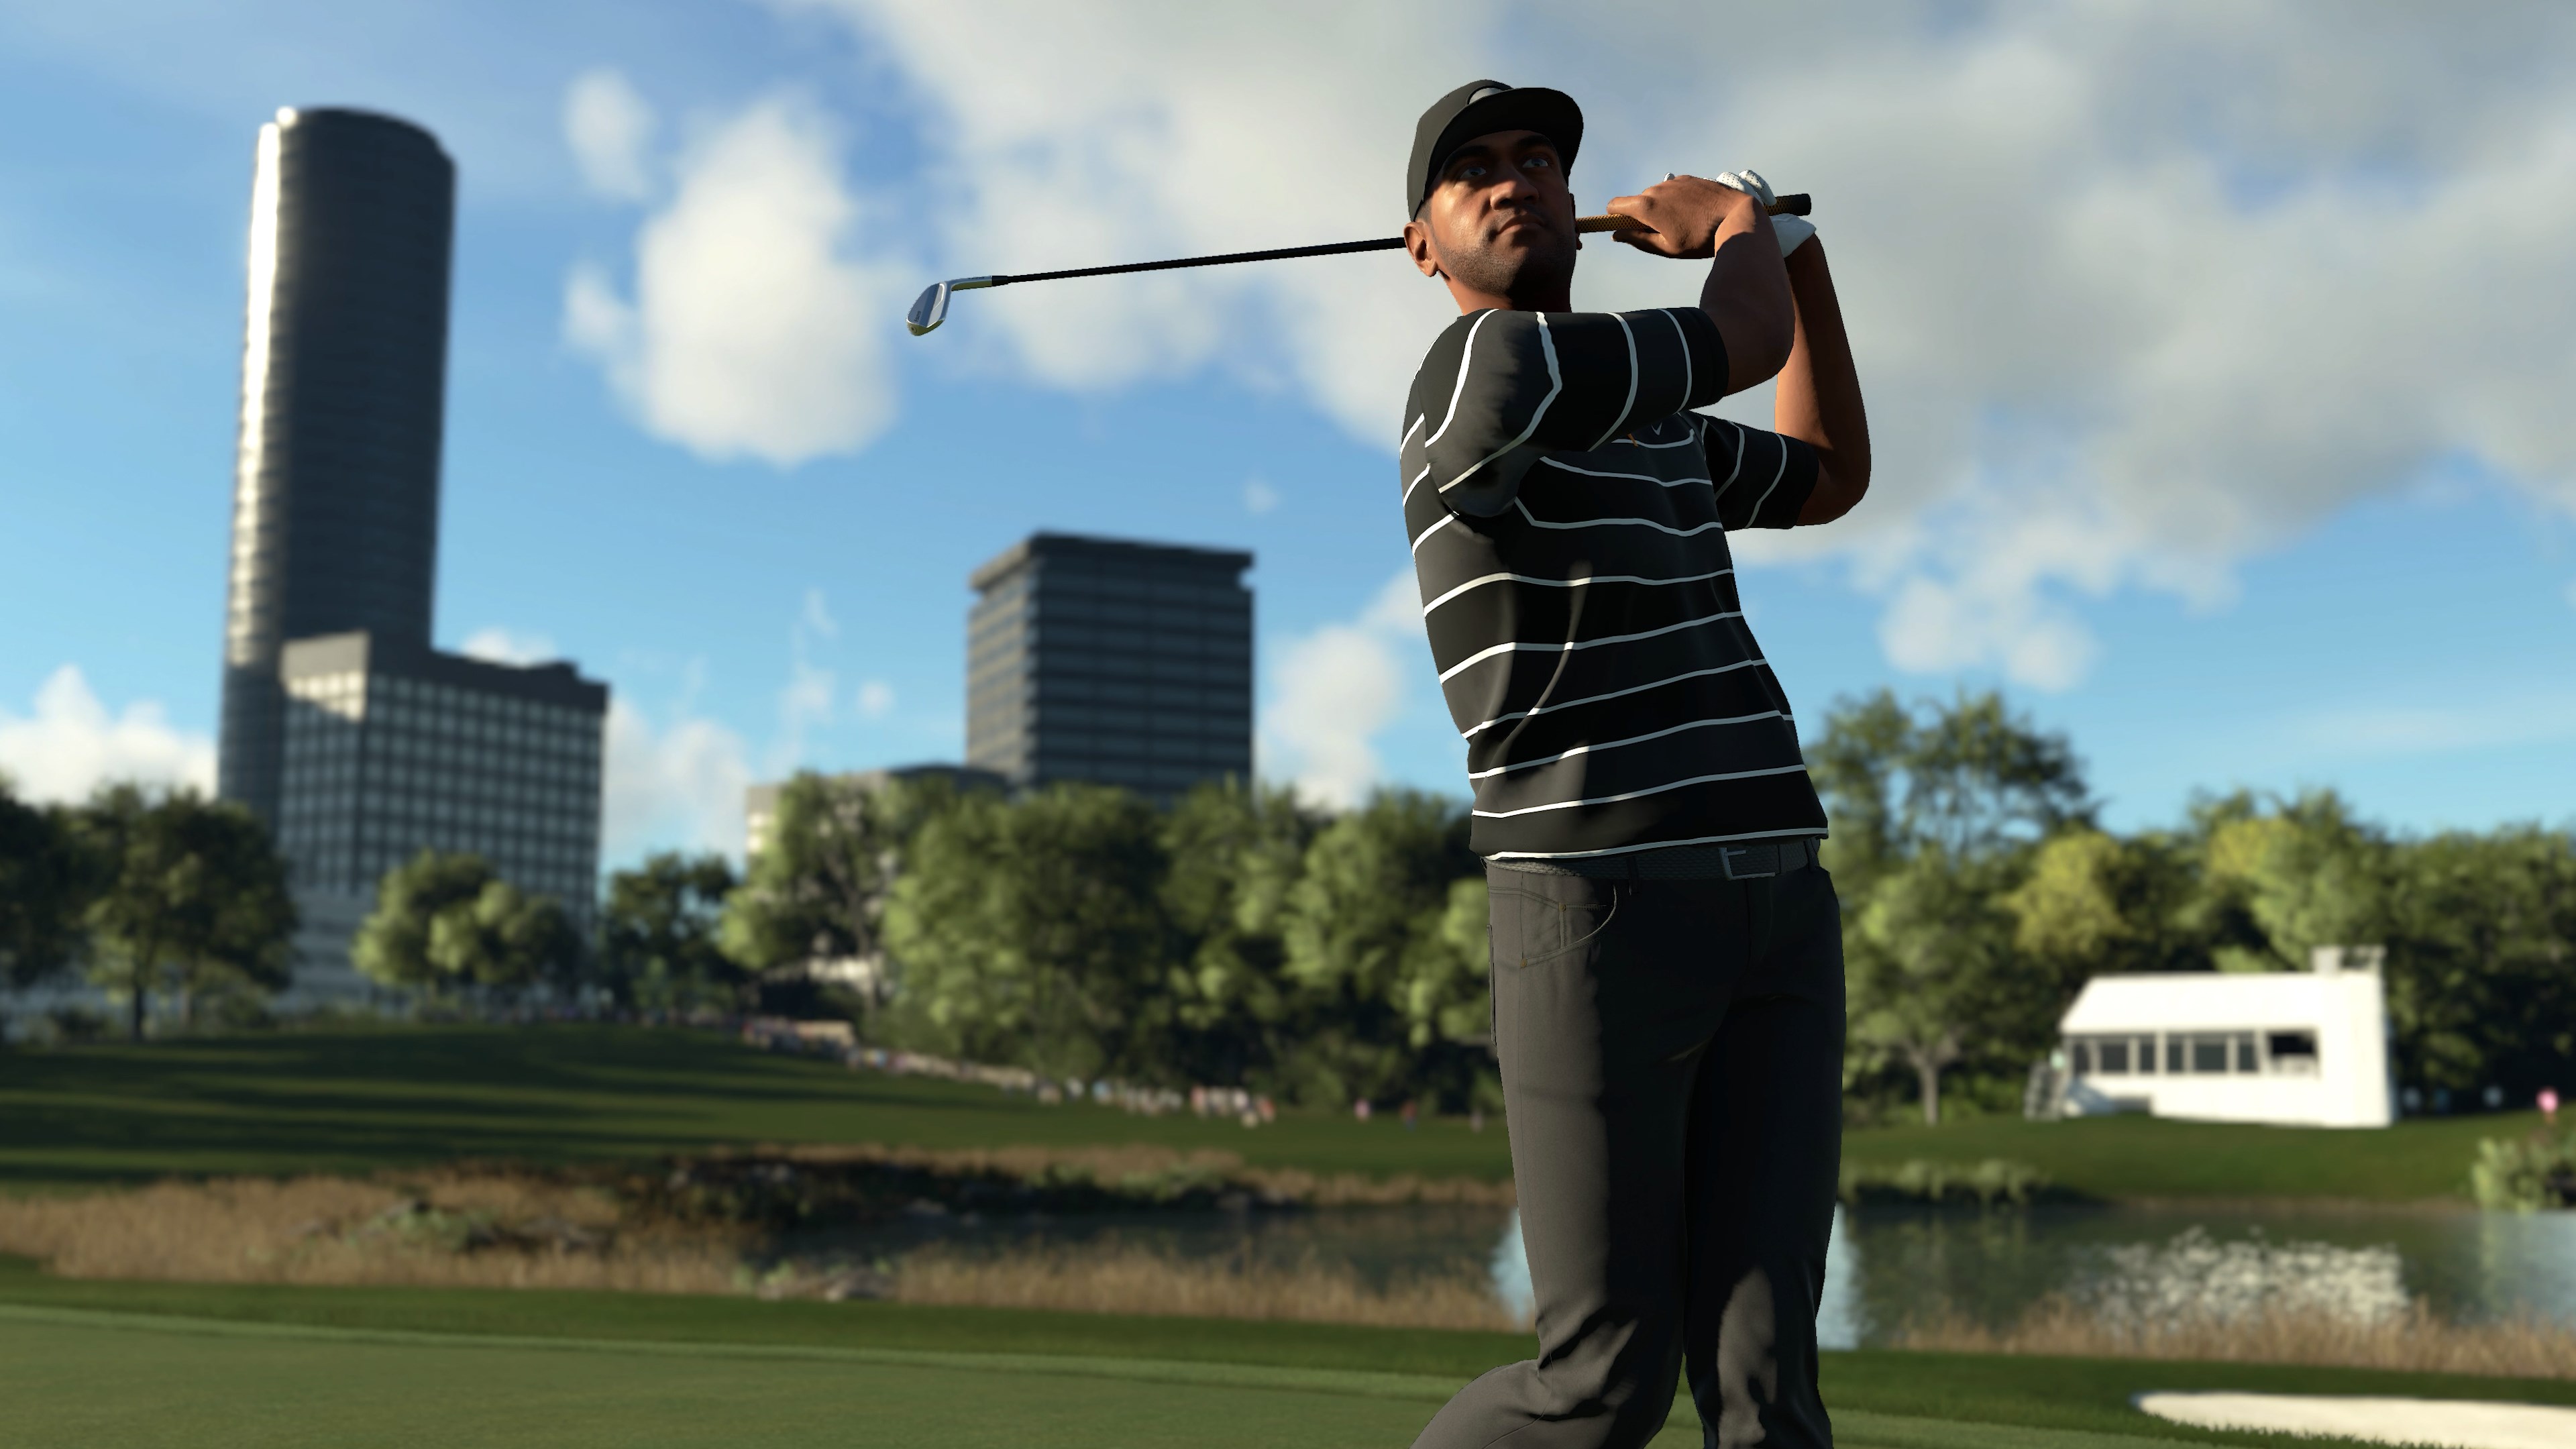 Free Play Days - PGA Tour 2K23, The Witcher 3: Wild Hunt, Meet Your Maker,  and TramSim - Xbox Wire